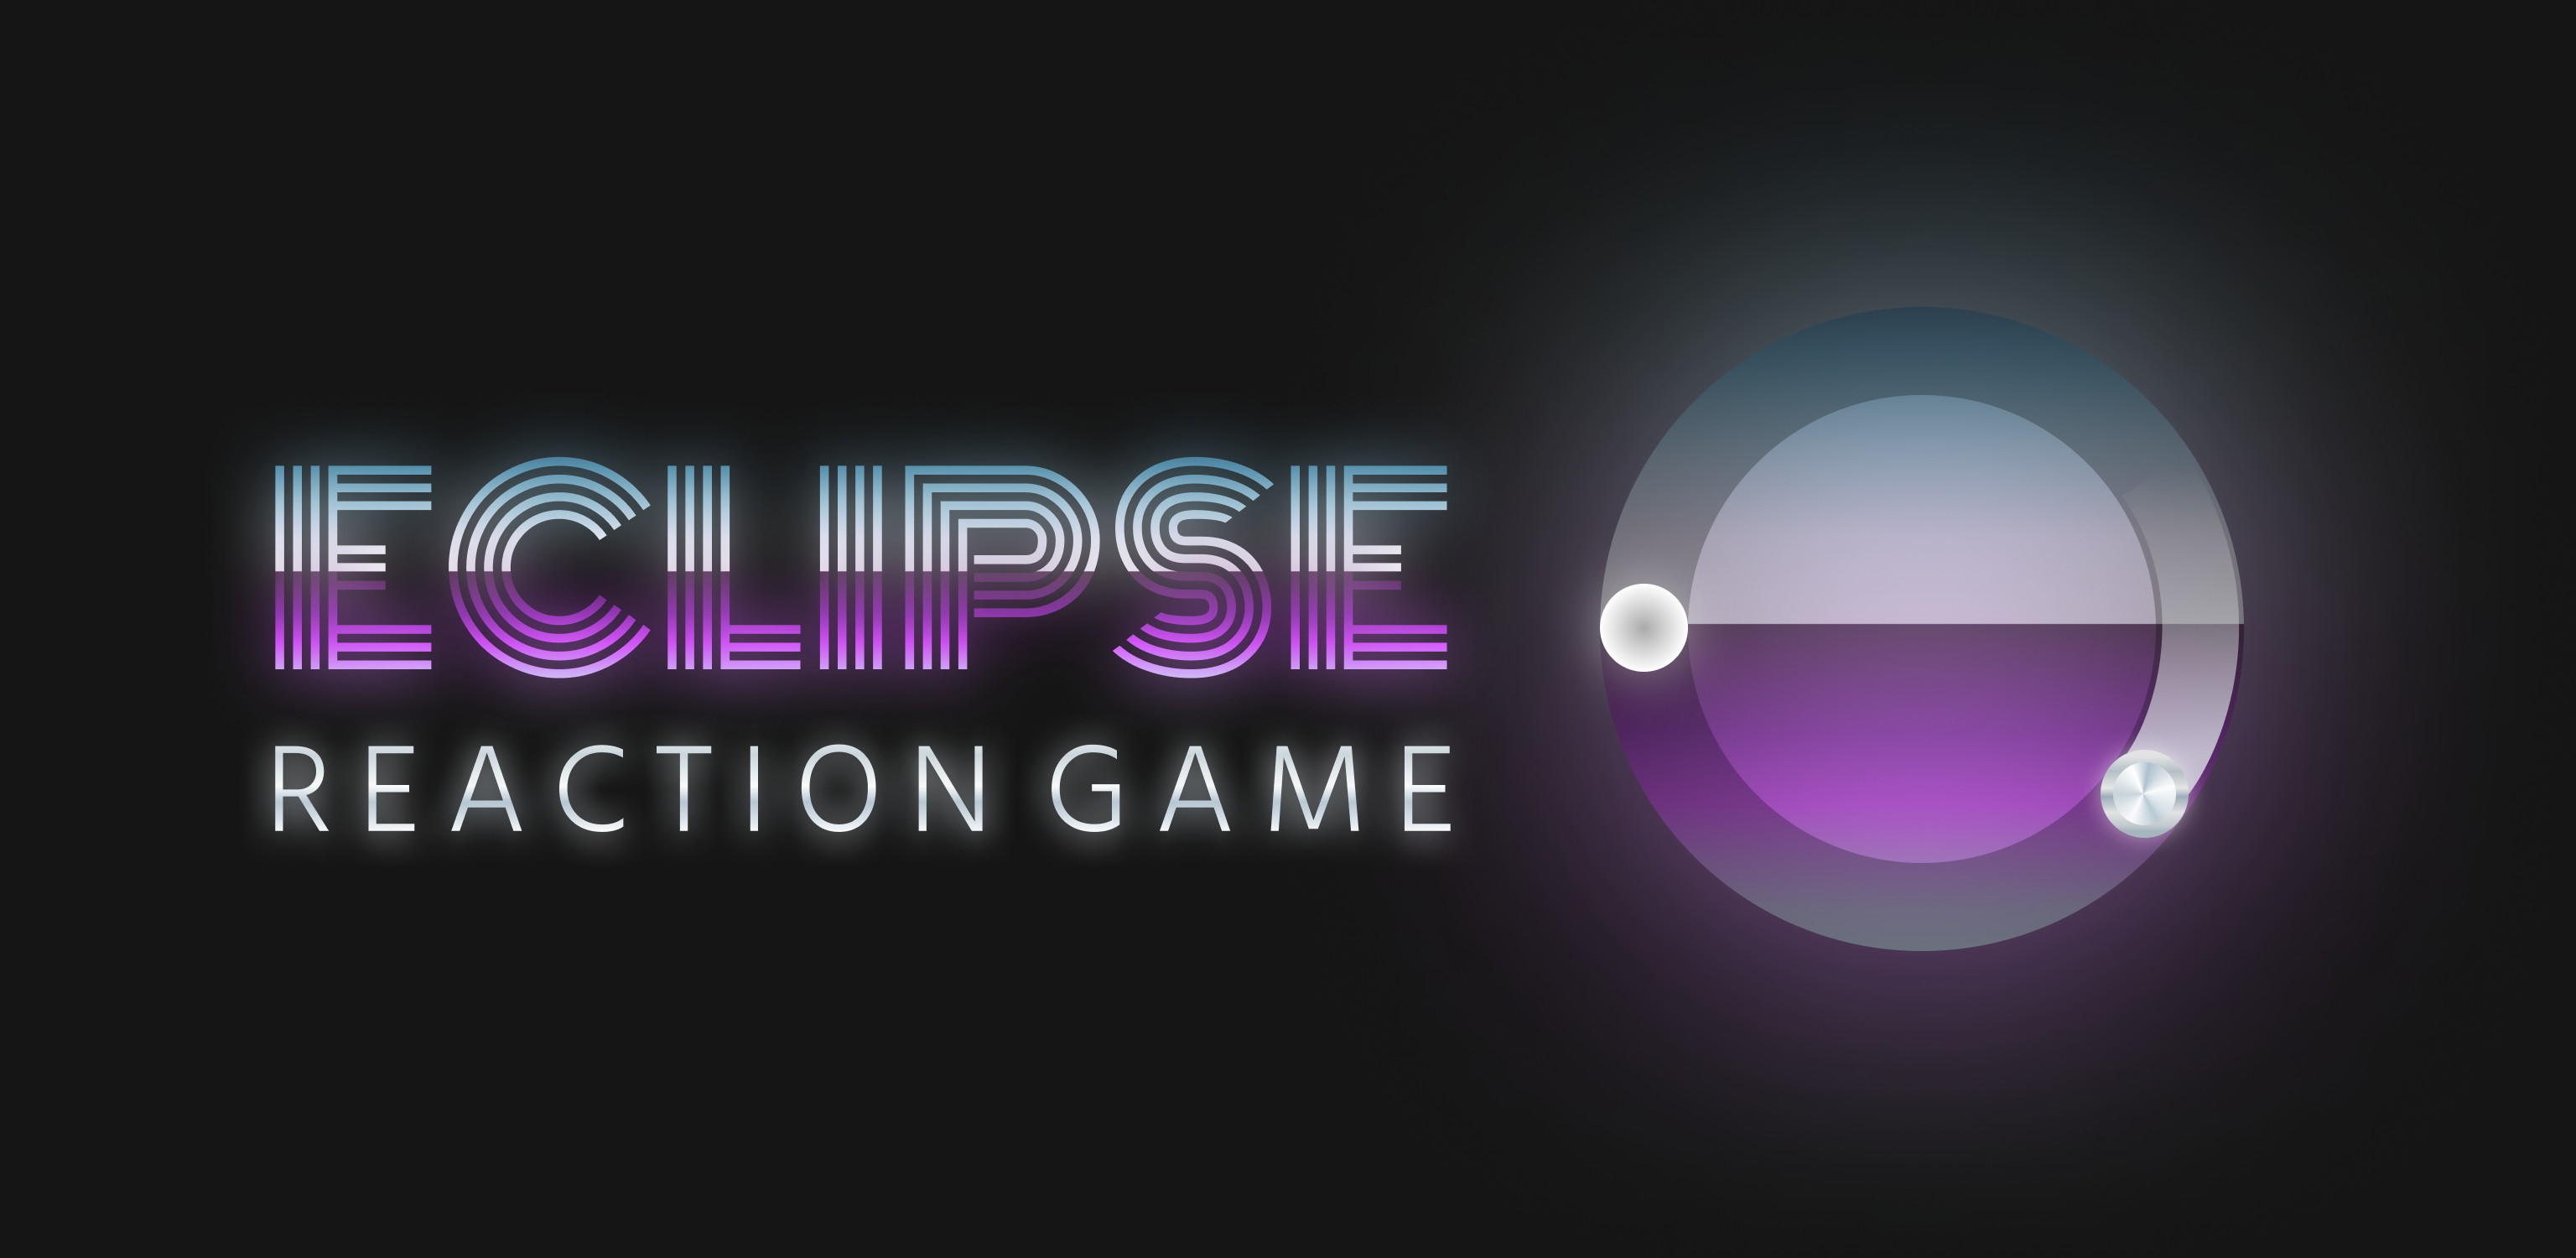 Eclipse: Reaction Game